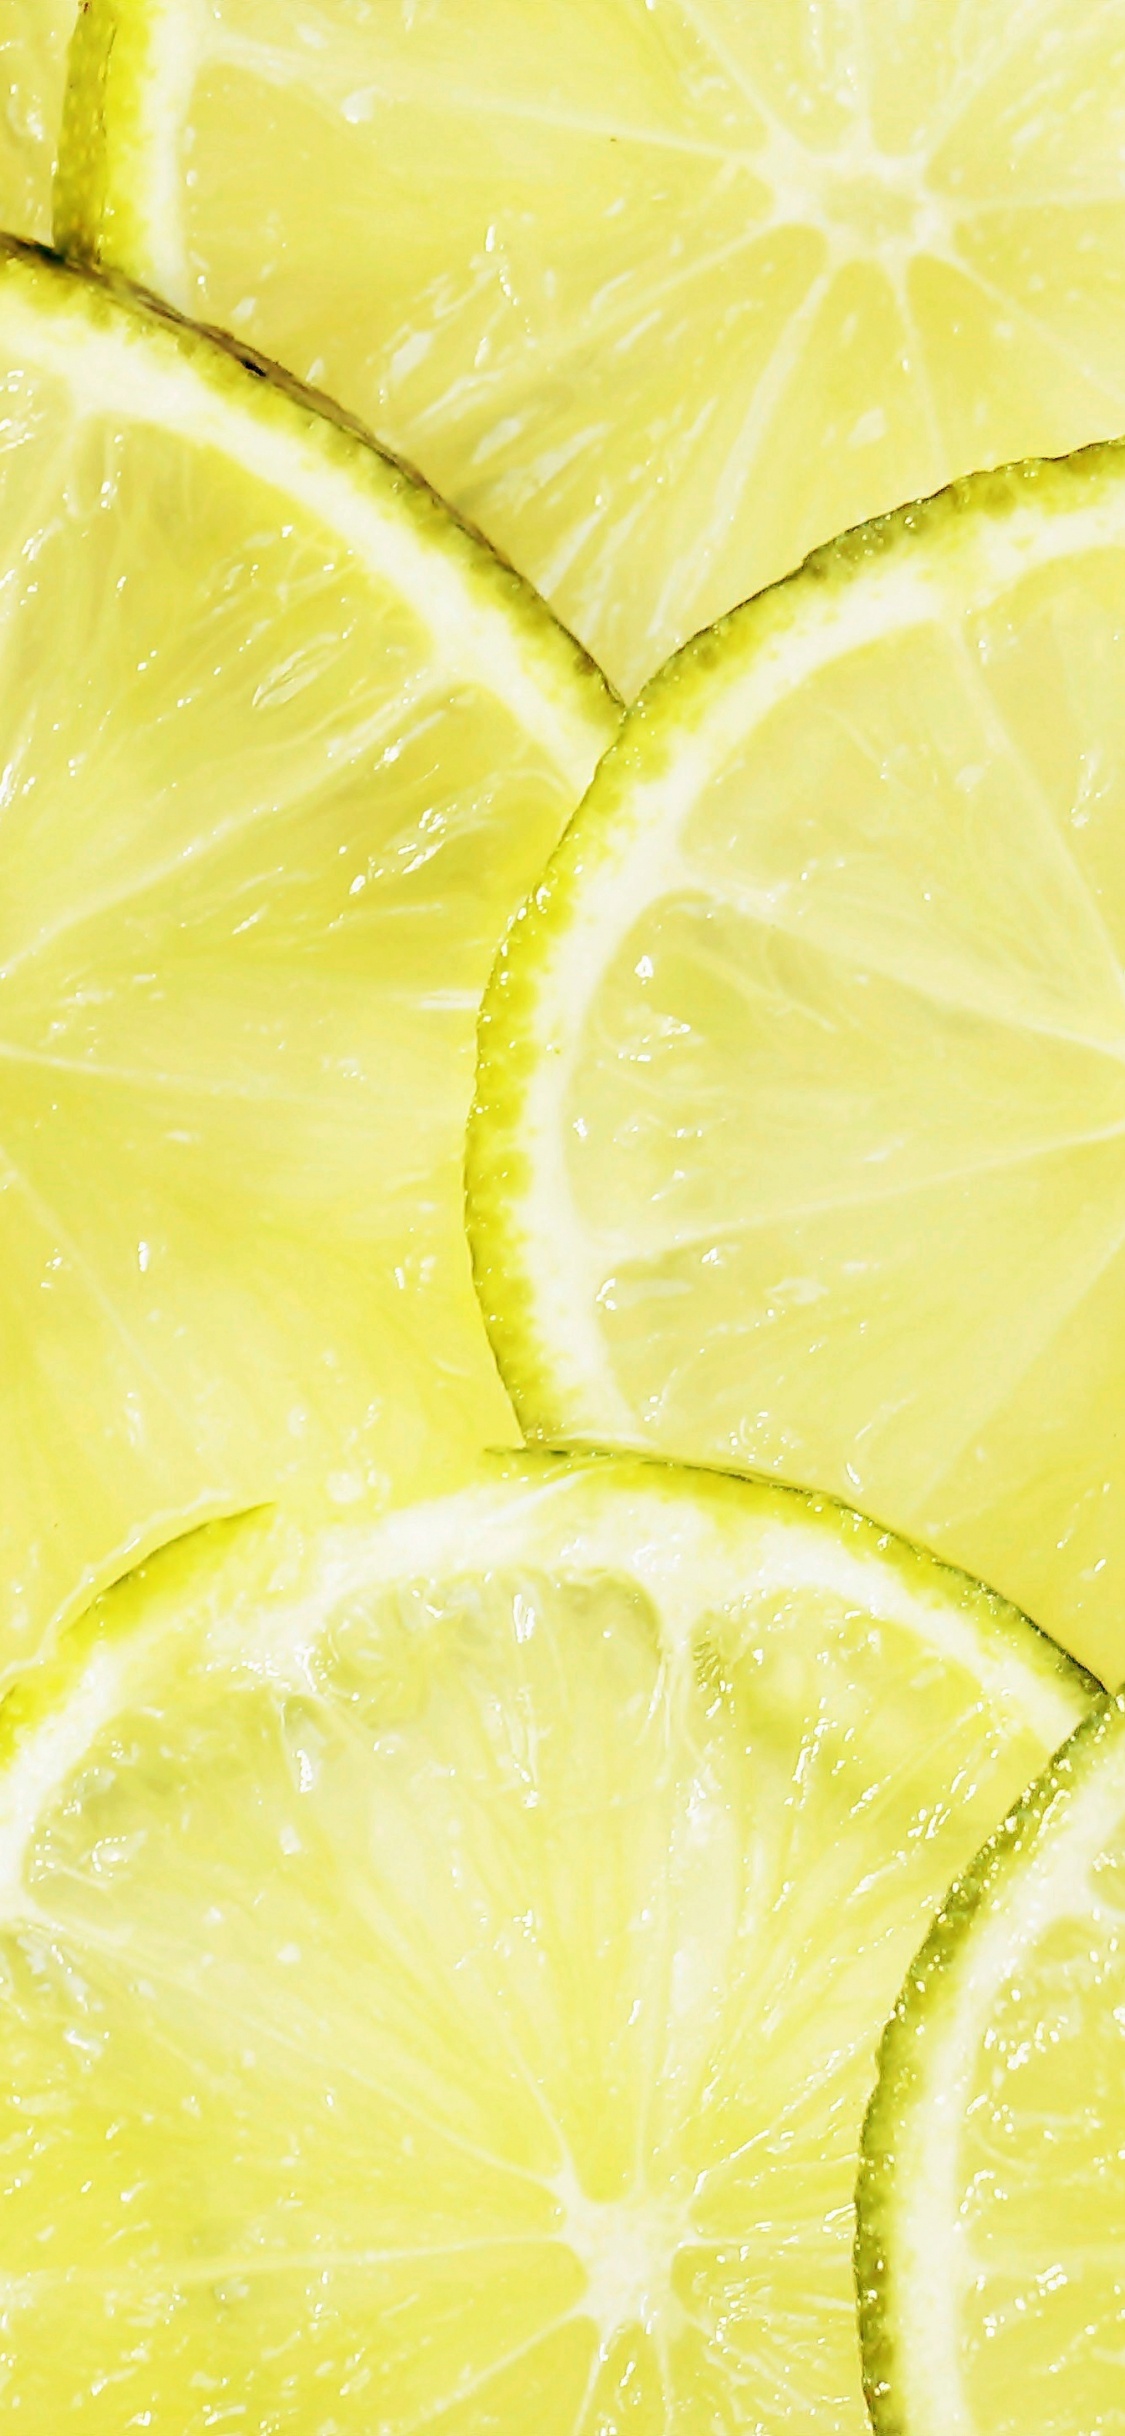 Yellow Lemon Fruit With Water Droplets. Wallpaper in 1125x2436 Resolution